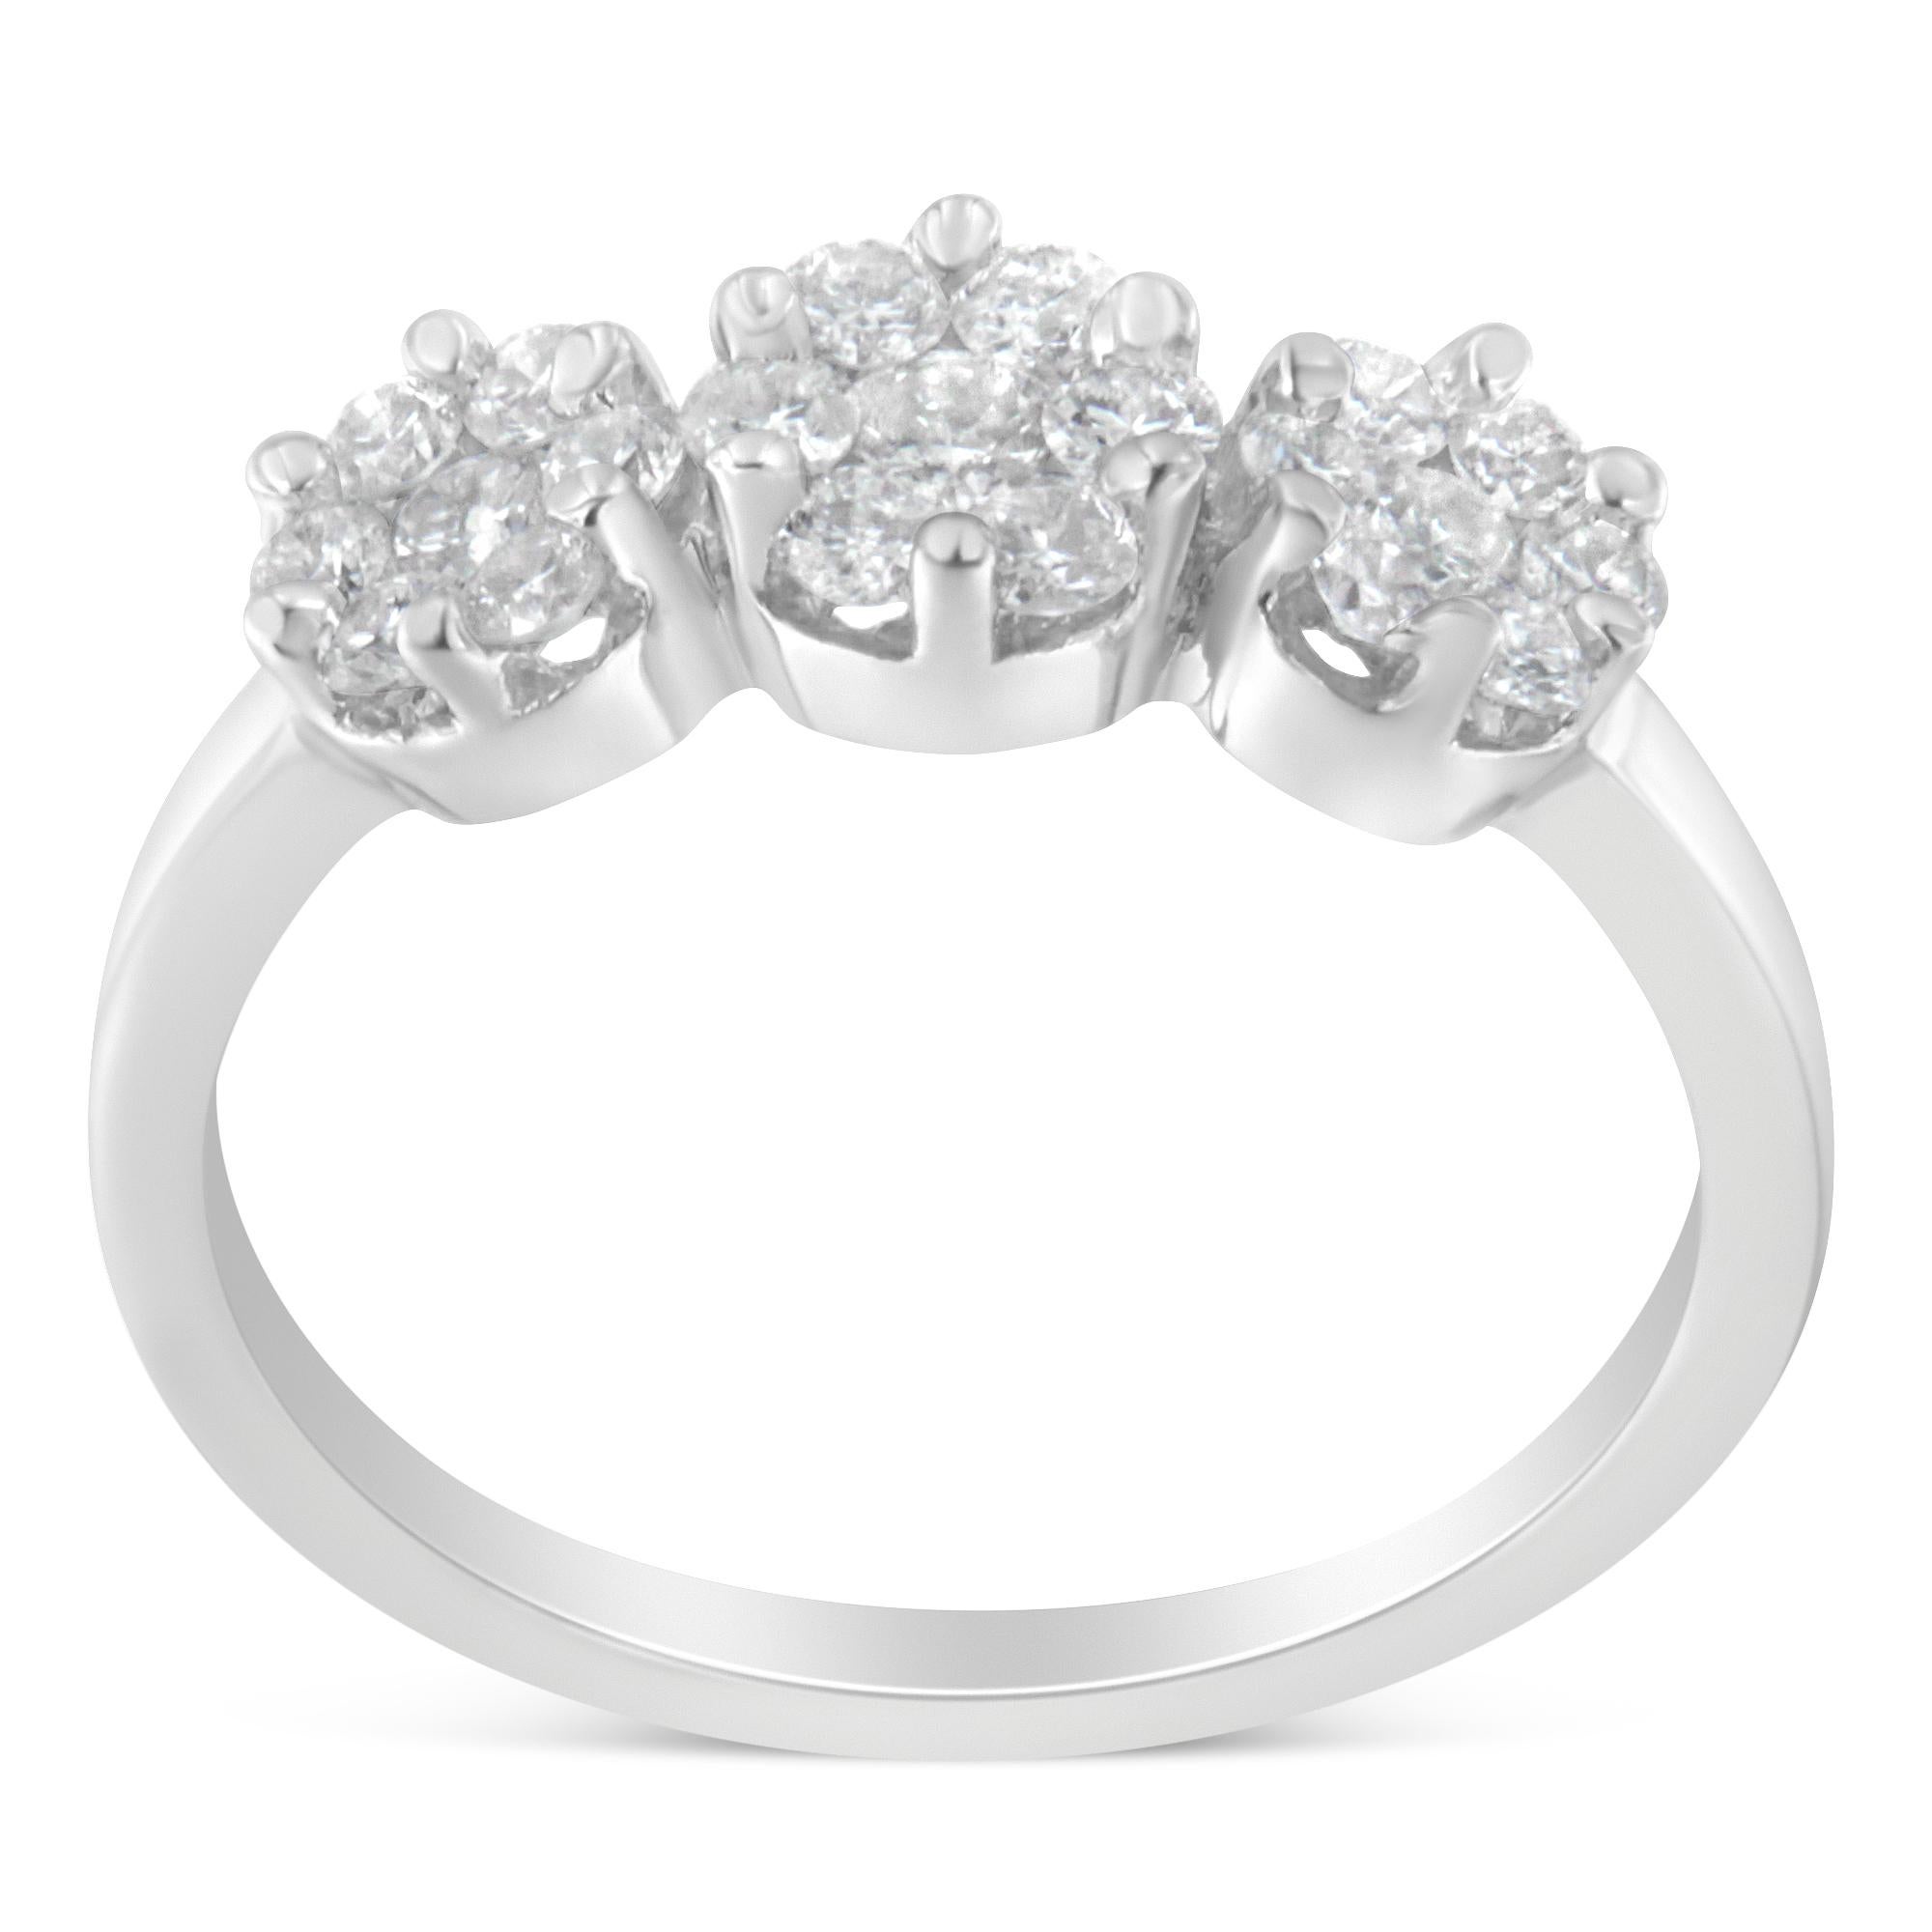 For Sale:  14K White Gold Three-Stone Cluster 0.7 Carat Diamond Ring 4